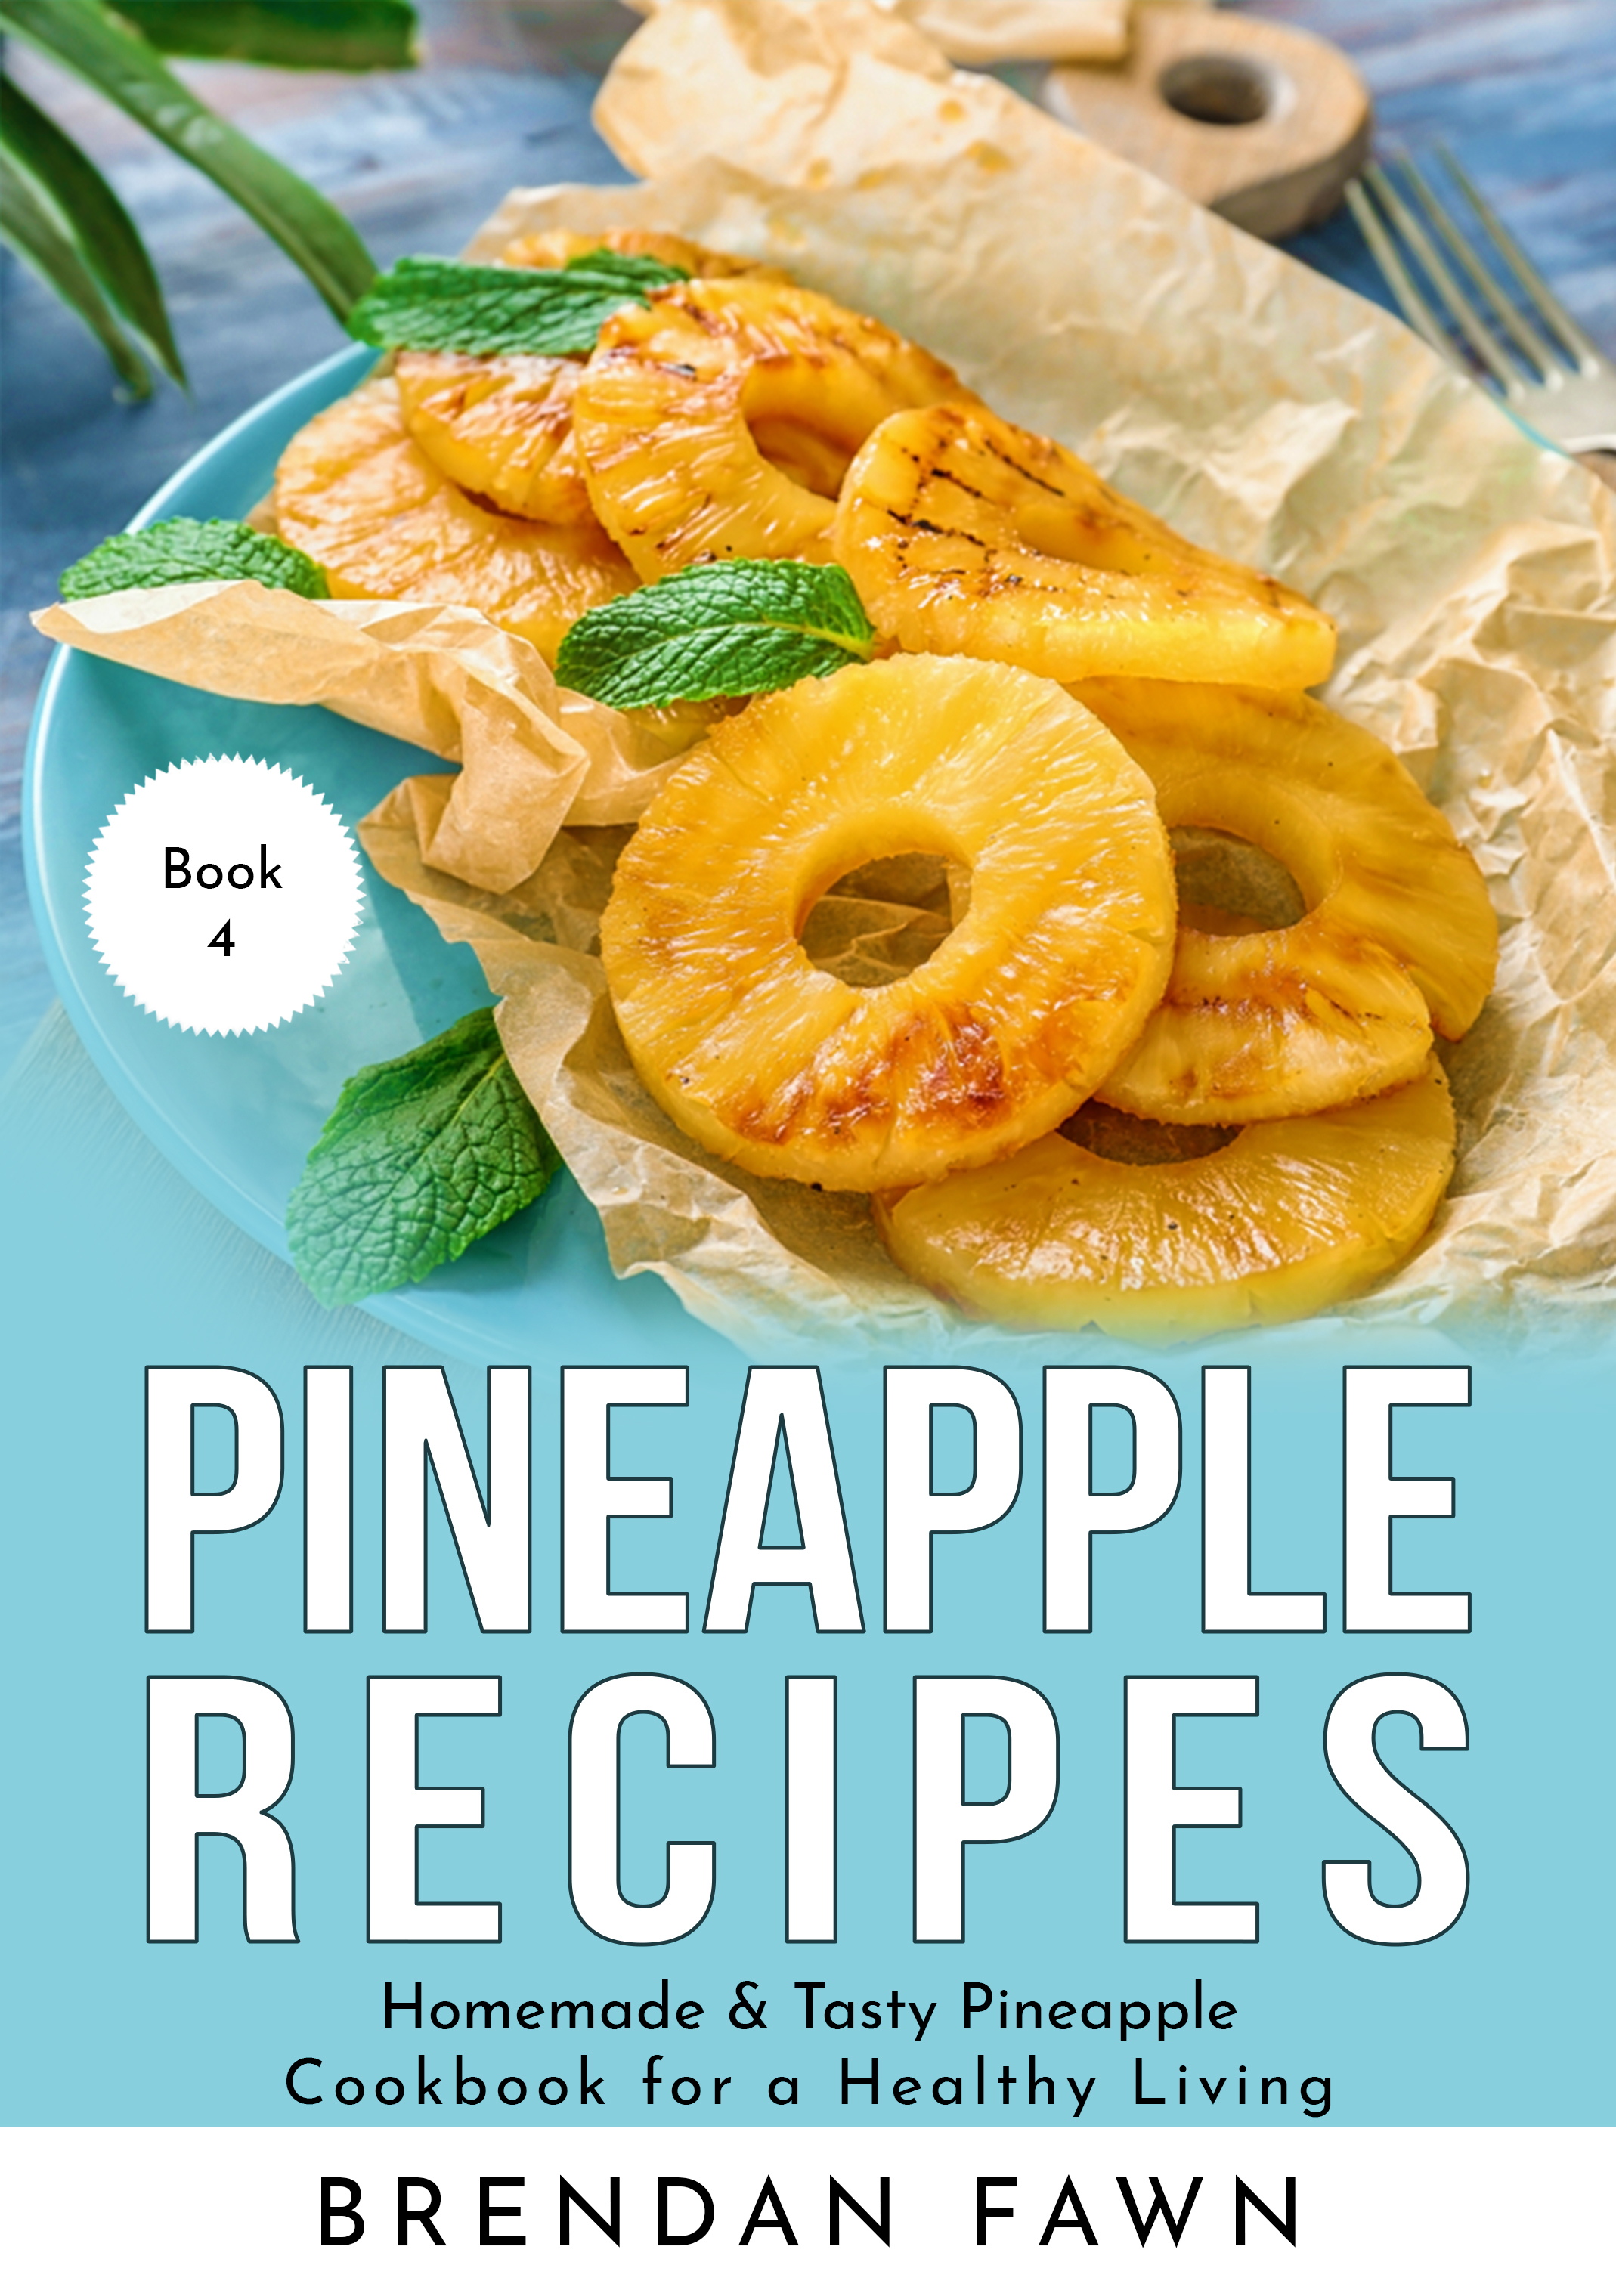 FREE: Pineapple Recipes: Homemade & Tasty Pineapple Cookbook for a Healthy Living by Brendan Fawn